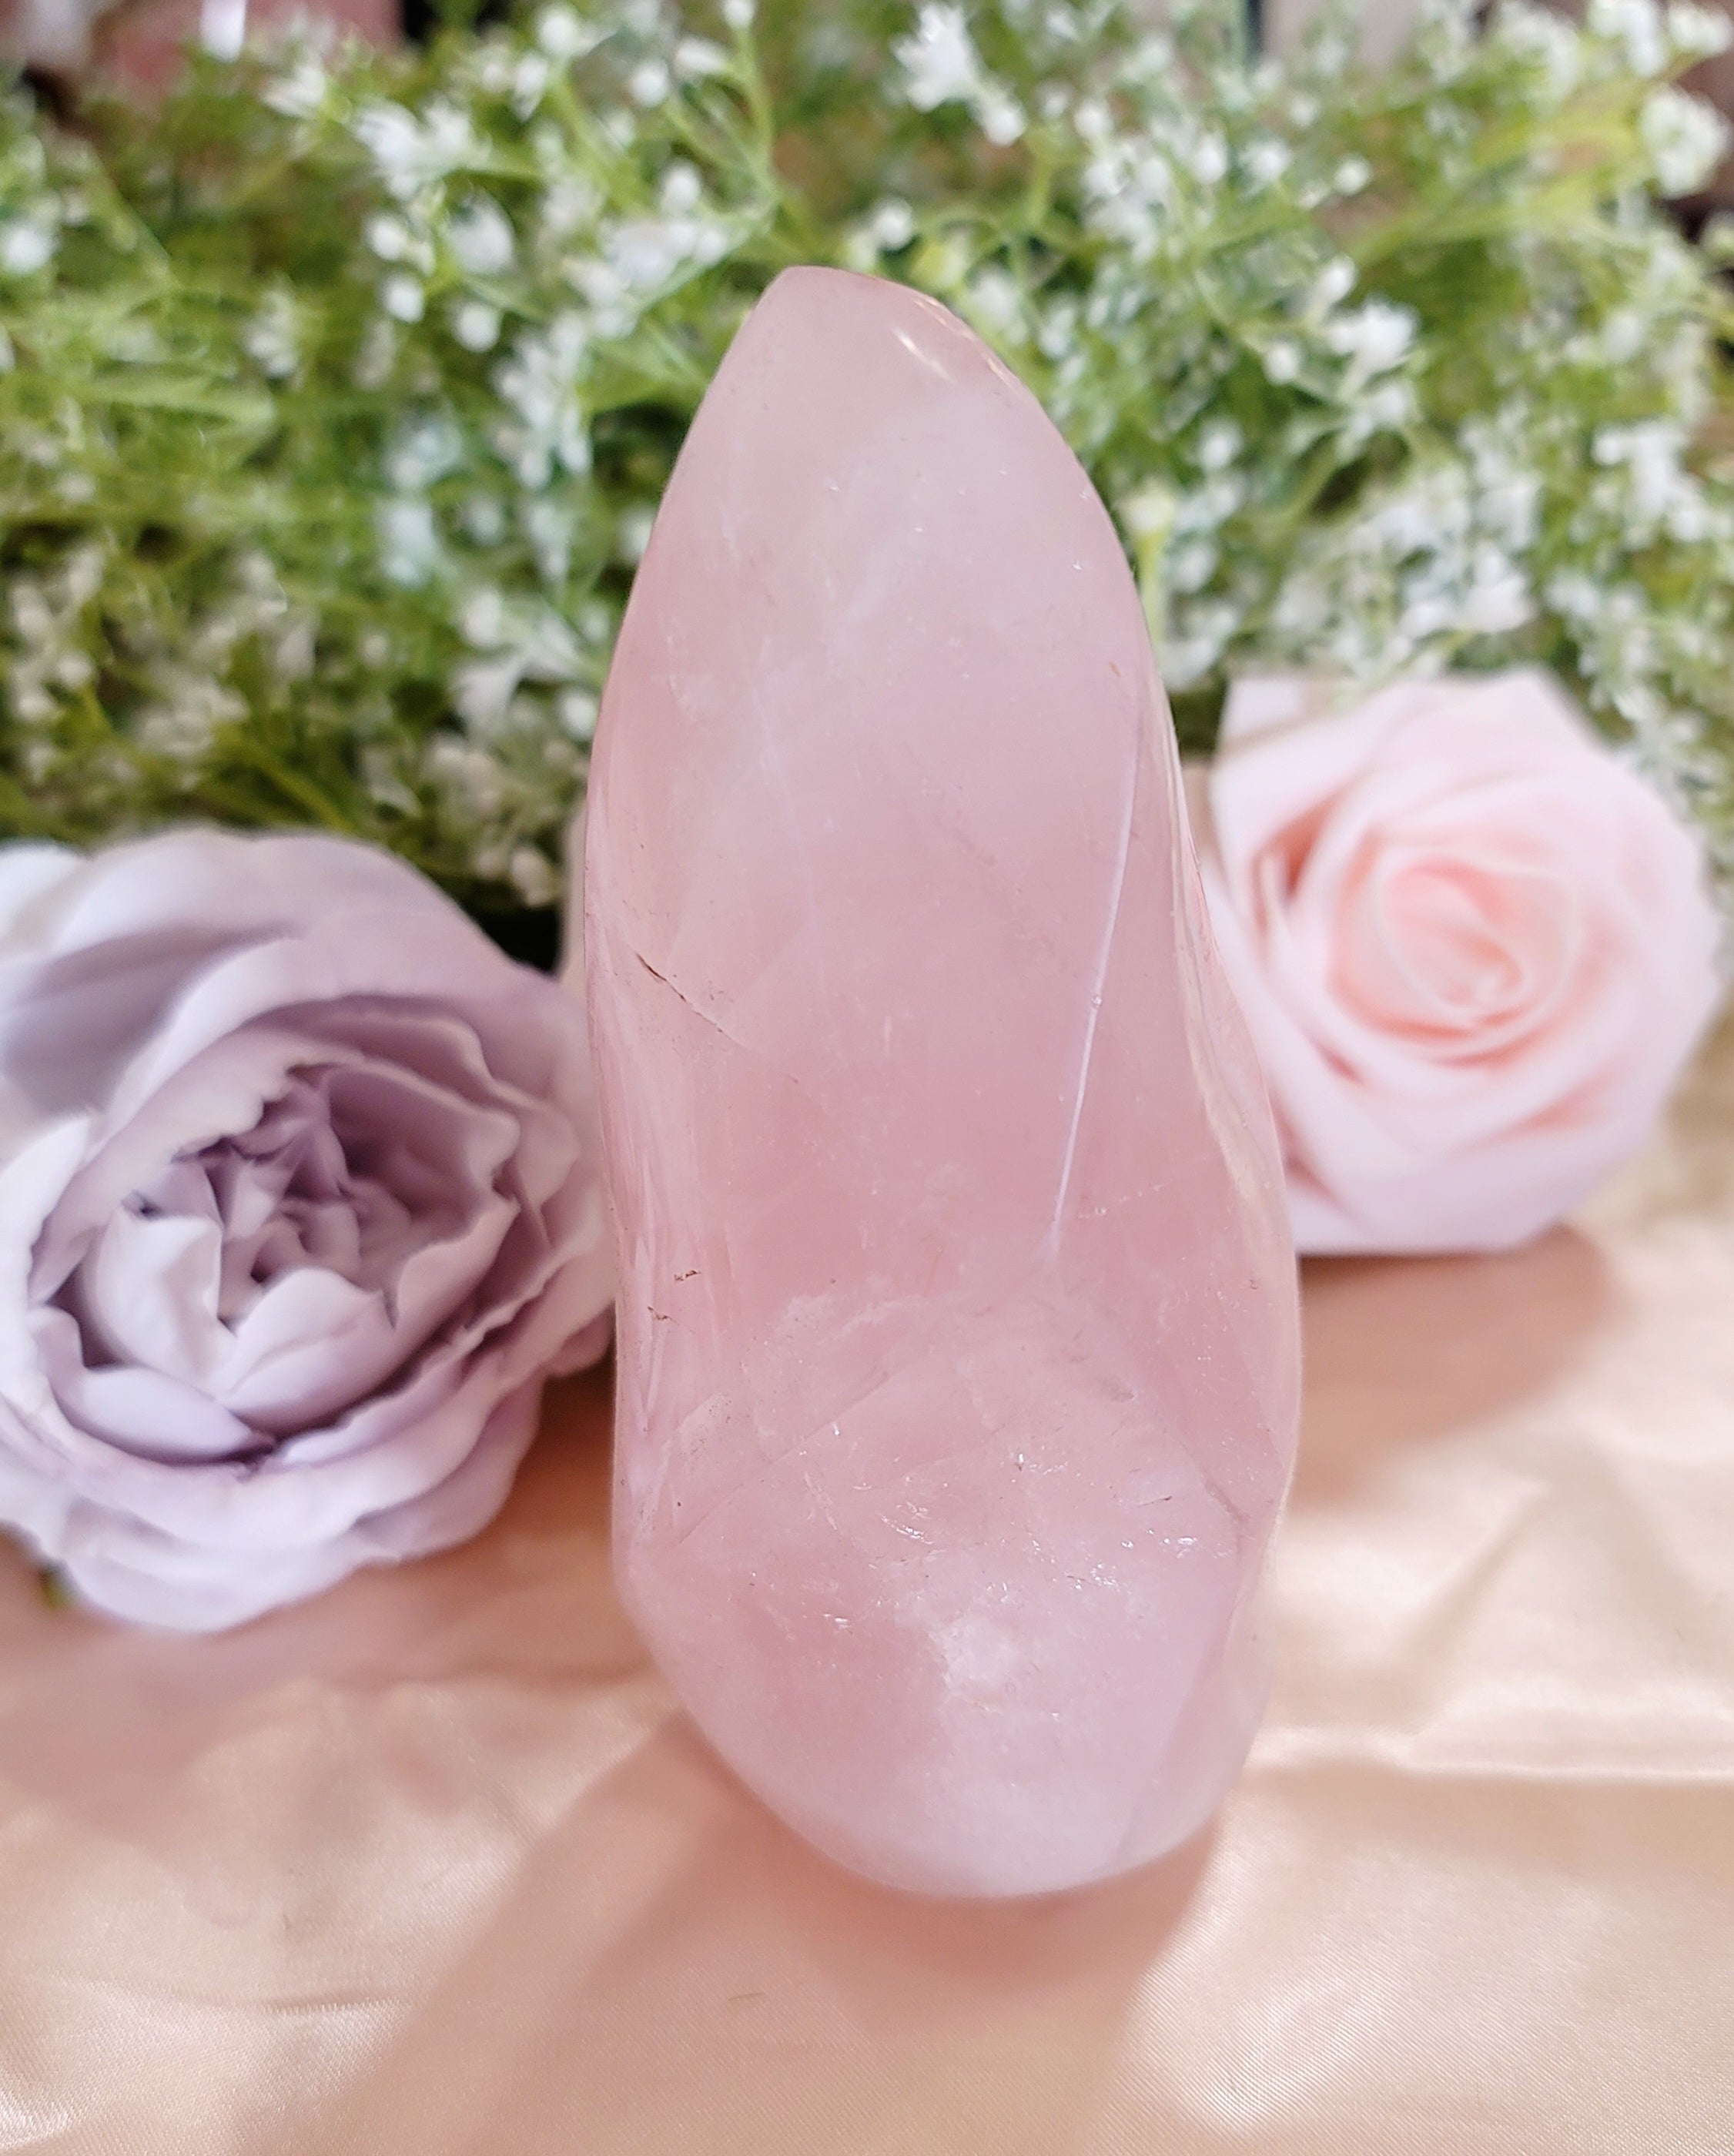 Rose Quartz Flame for Restoring Trust Within, Profound Healing and Compassion